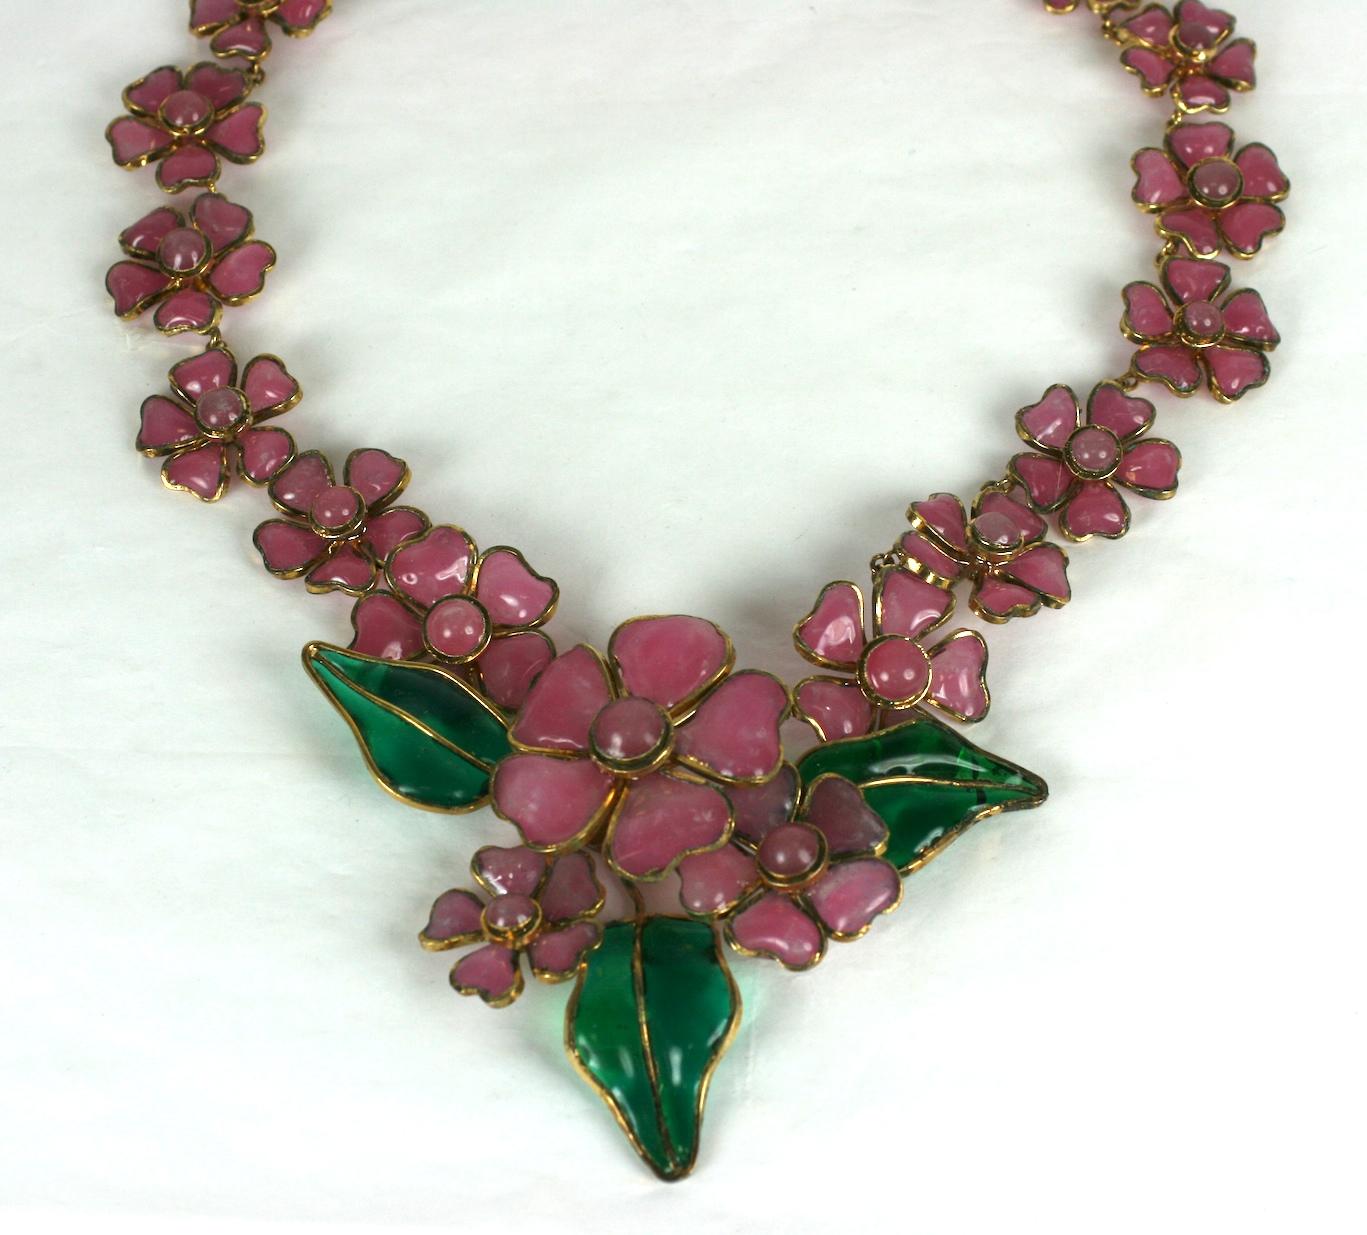 Rare Chanel 1938 Revival Flower Parure In Excellent Condition For Sale In New York, NY